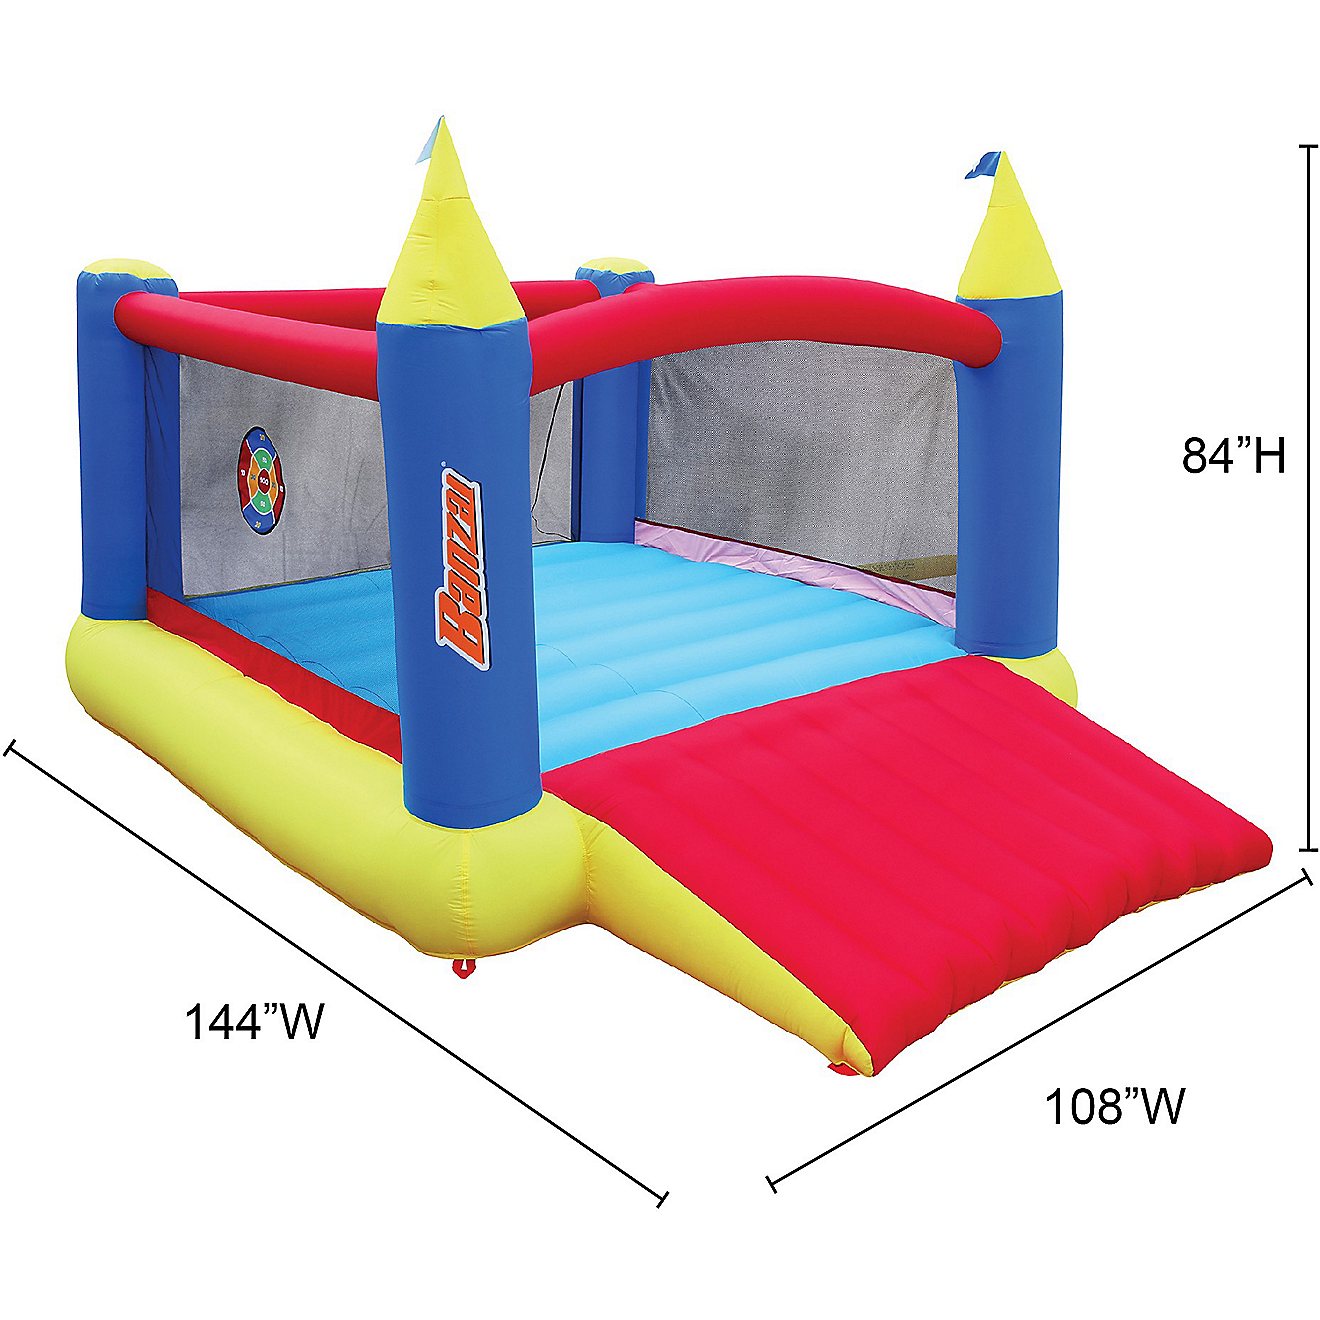 Banzai Slide 'N Score Activity Bouncer Inflatable Bounce House                                                                   - view number 4